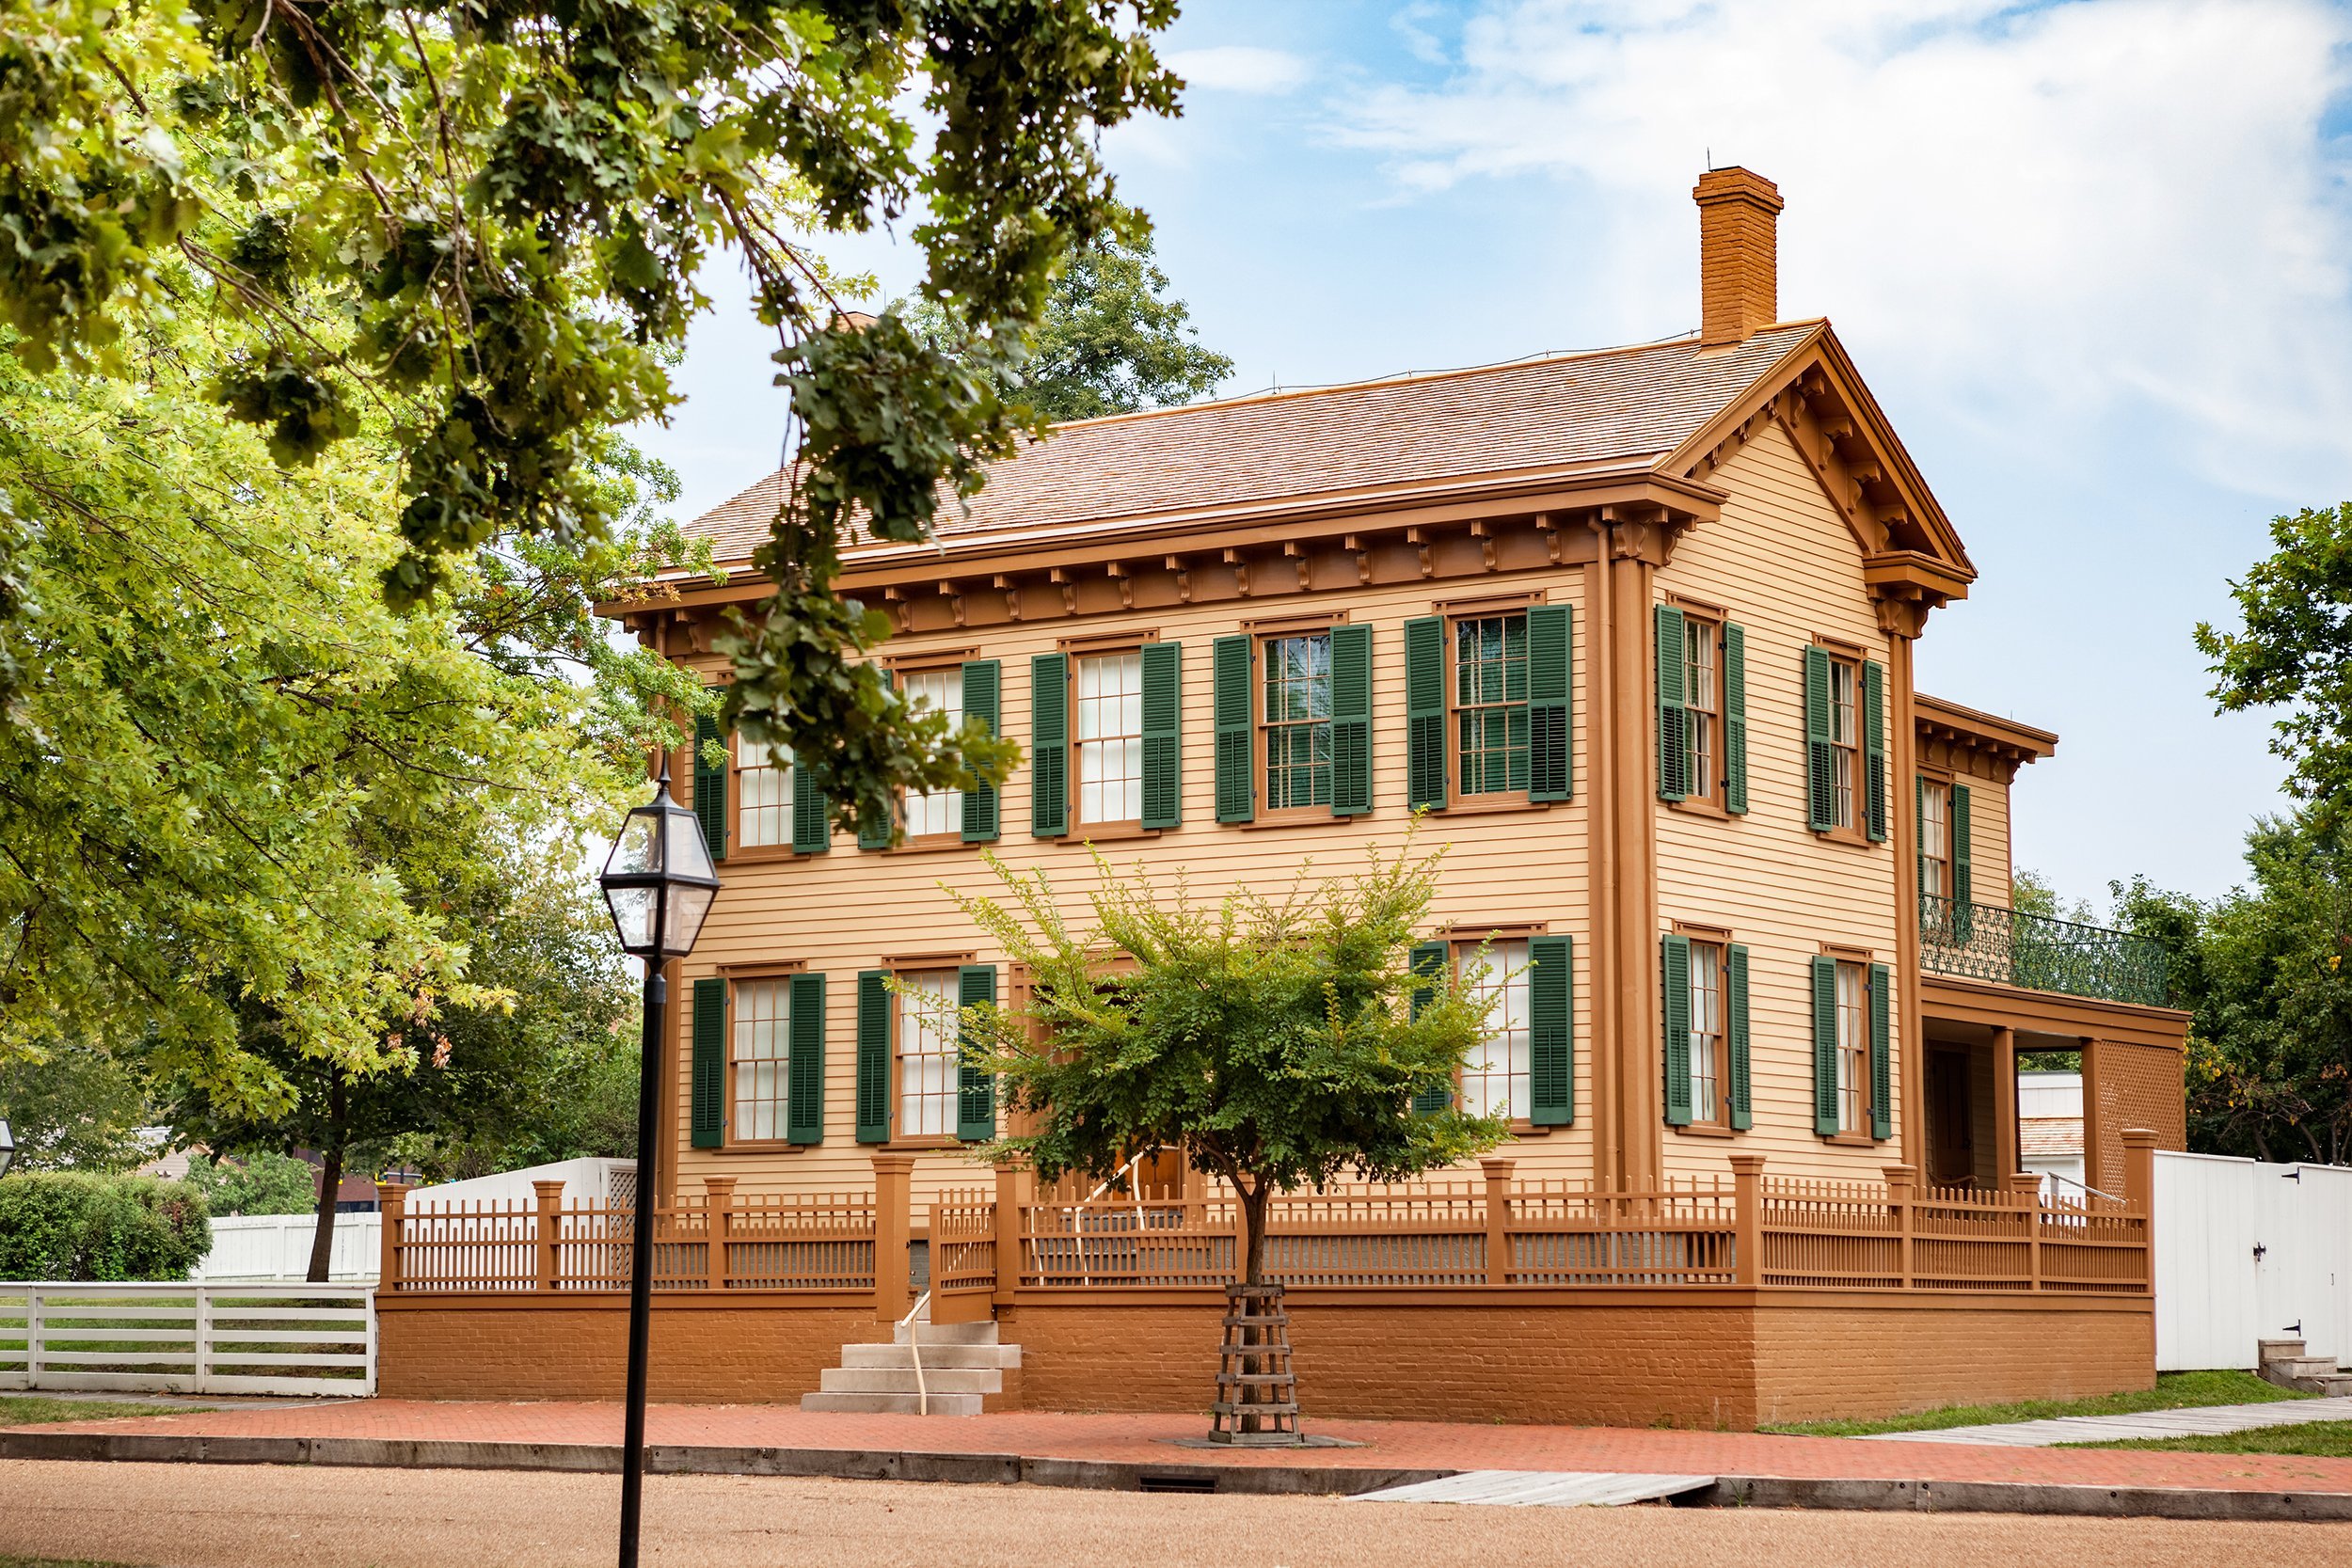 <p><a href="https://www.nps.gov/liho/index.htm">President Abraham Lincoln's home in Springfield</a> is free to visit, but a ticket for a ranger-led tour is required to enter the home. The tour takes about 20 to 25 minutes, and visitors learn about the Lincoln family's 17 years in the home and the 1860 presidential campaign. During the busy summer months, be sure to arrive early before tickets are all taken. </p><p><b>Related:</b> <a href="https://blog.cheapism.com/white-house-renovations/">How Presidents (and First Ladies) Changed the Look of the White House</a></p>